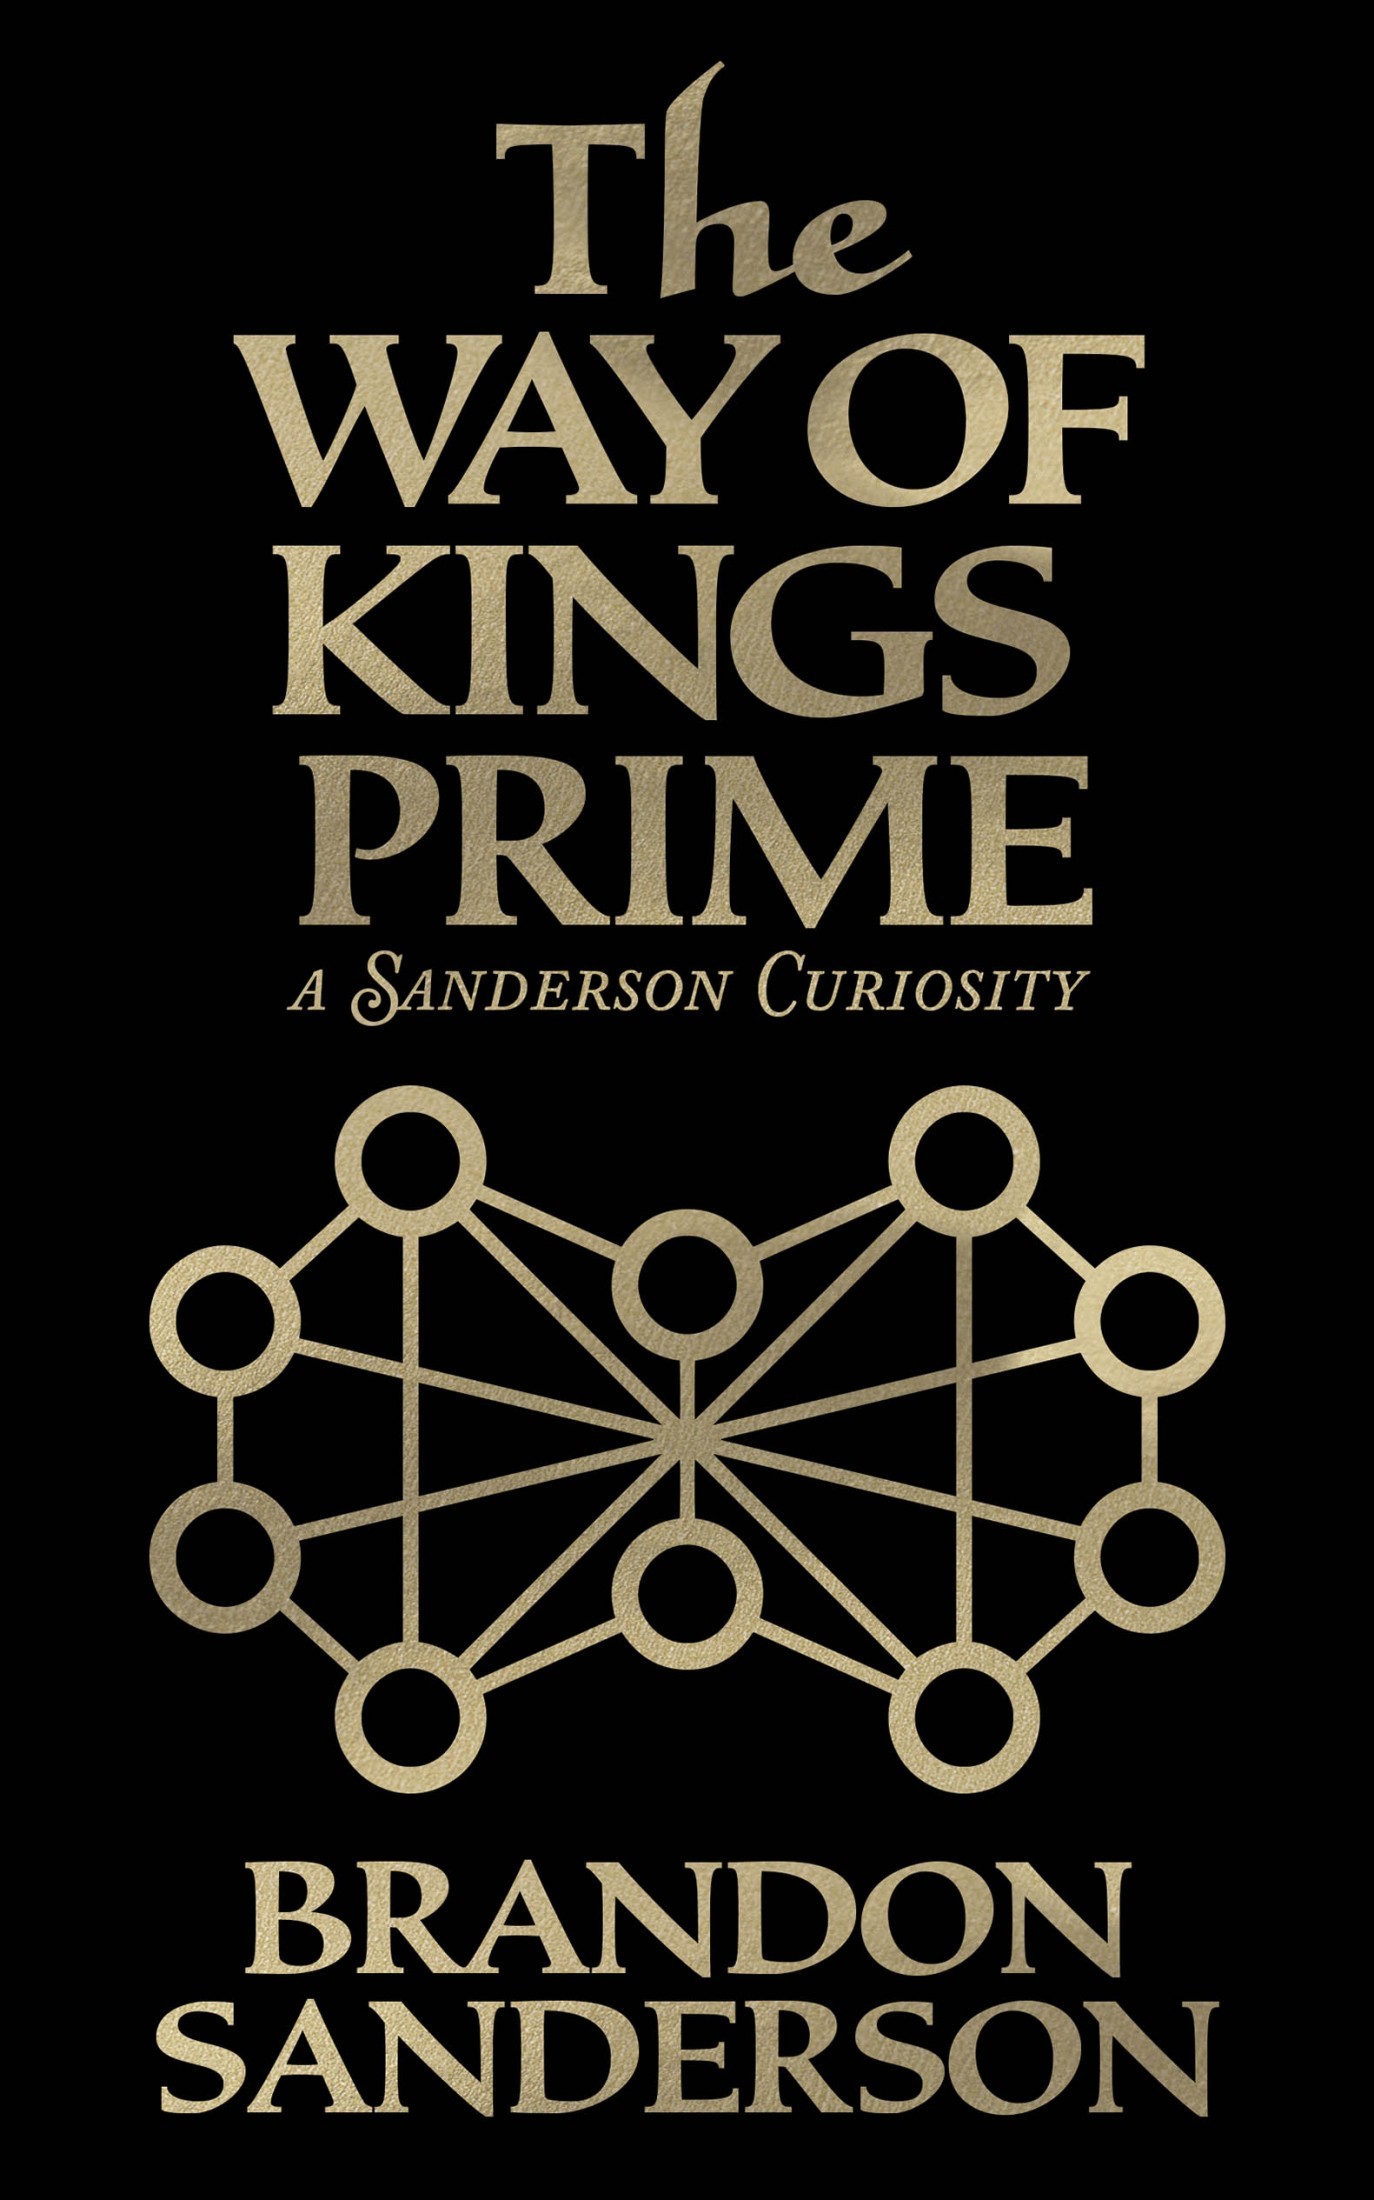 The Way of Kings Prime (alt version)